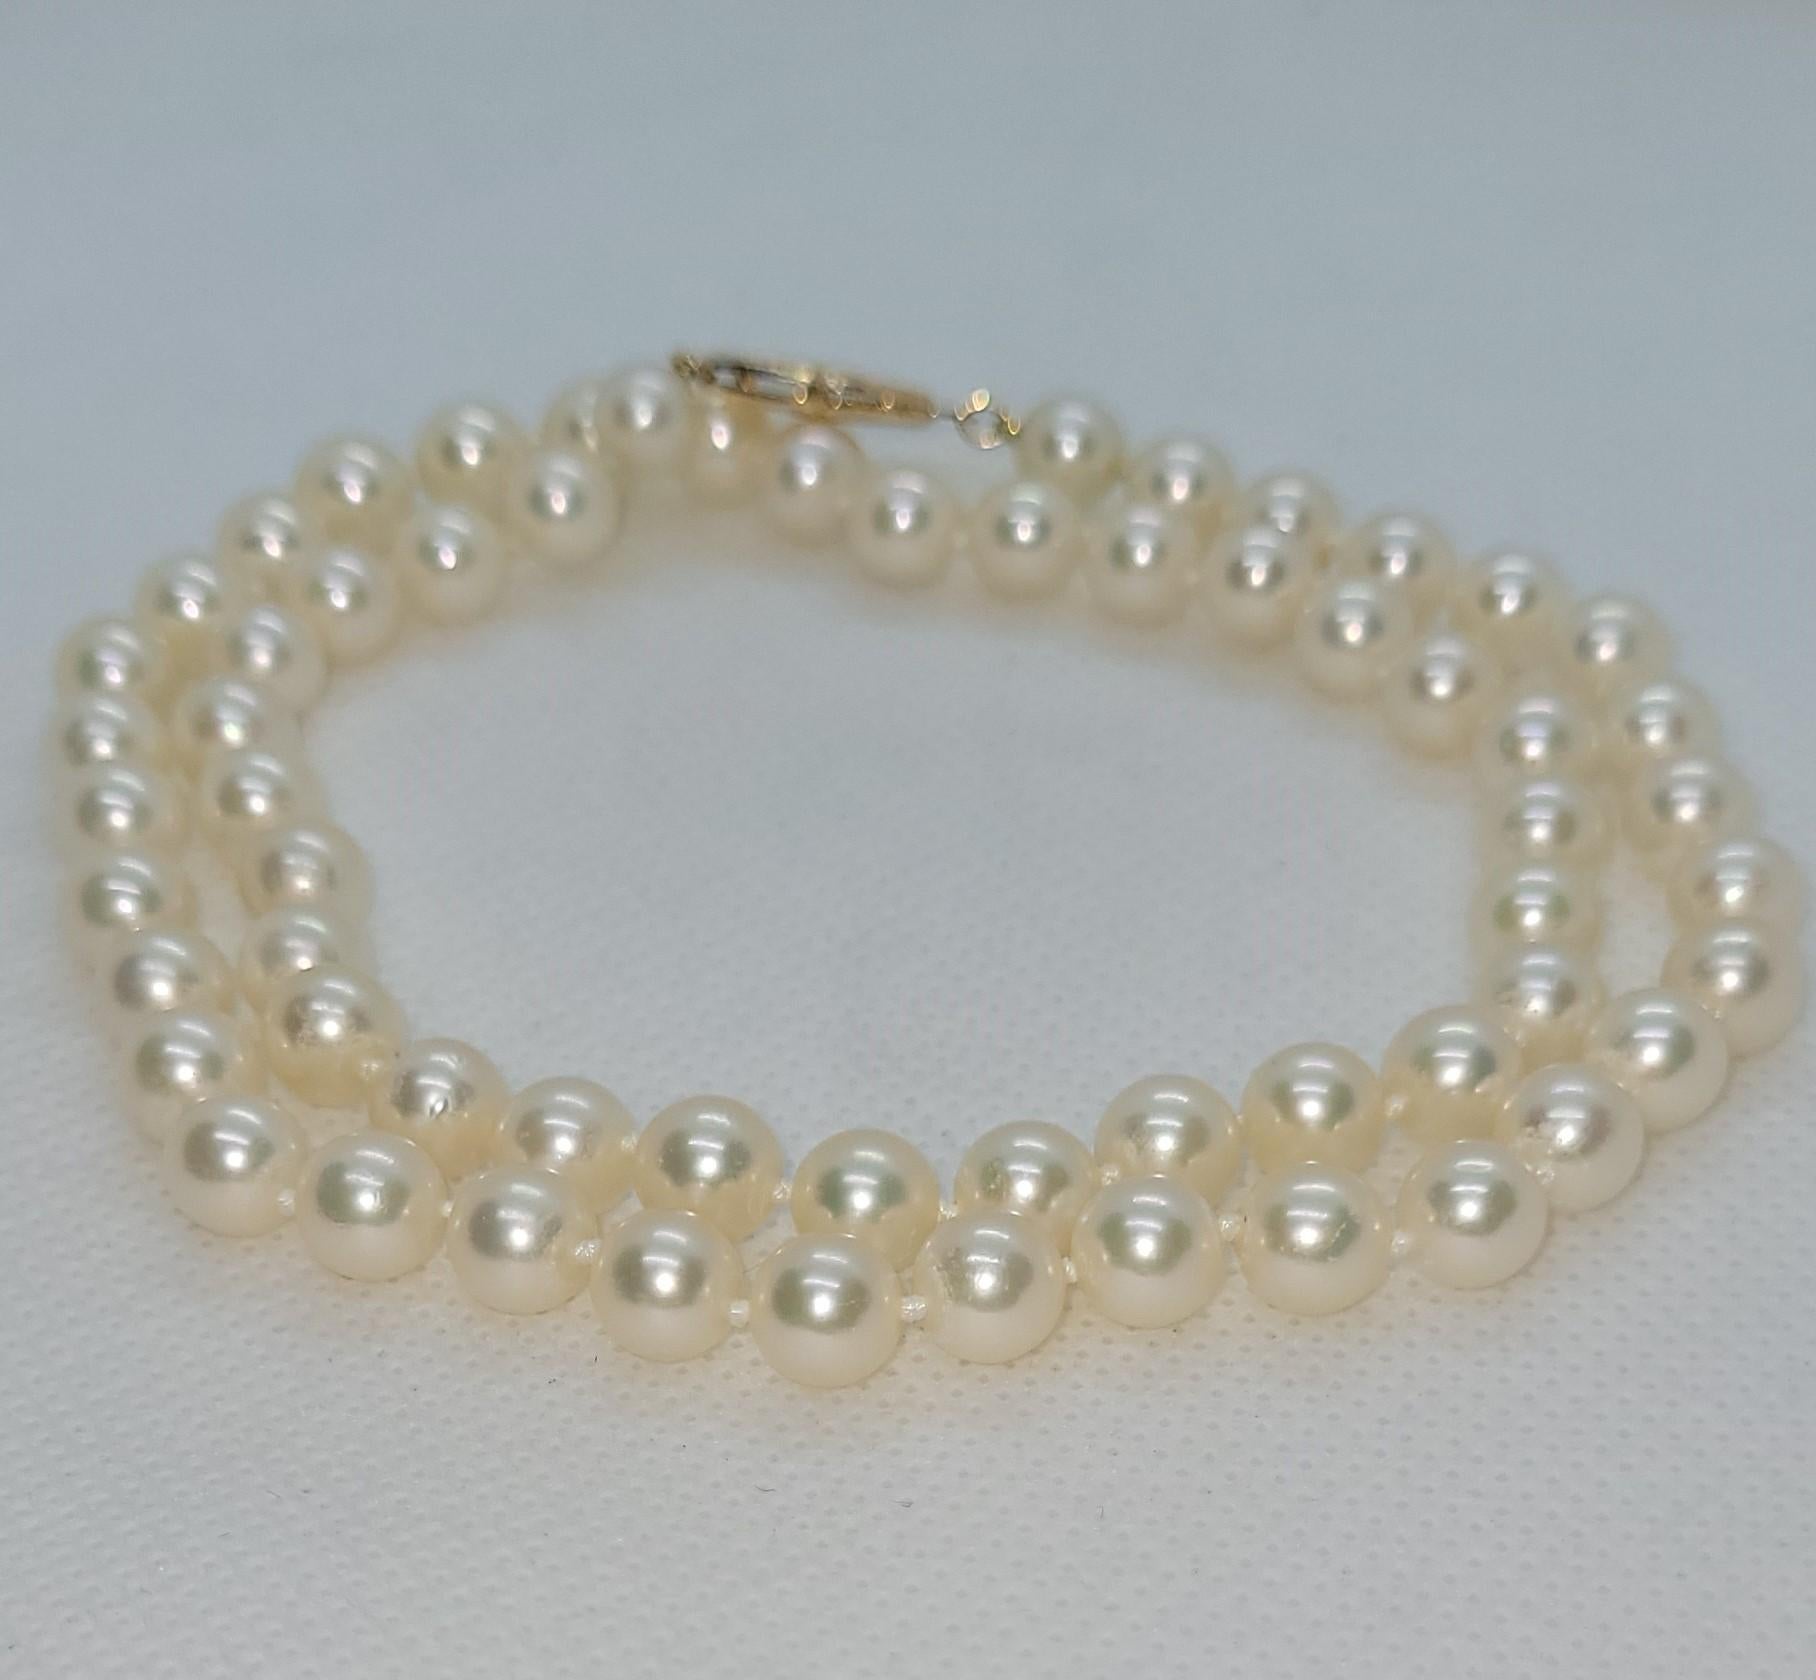 This elegant 18-inch white cultured pearl strand is a timeless addition to any jewelry collection. Each pearl measures a delicate 6.5mm in diameter, showcasing its classic beauty. The pearls are clean and lustrous, radiating a captivating glow that